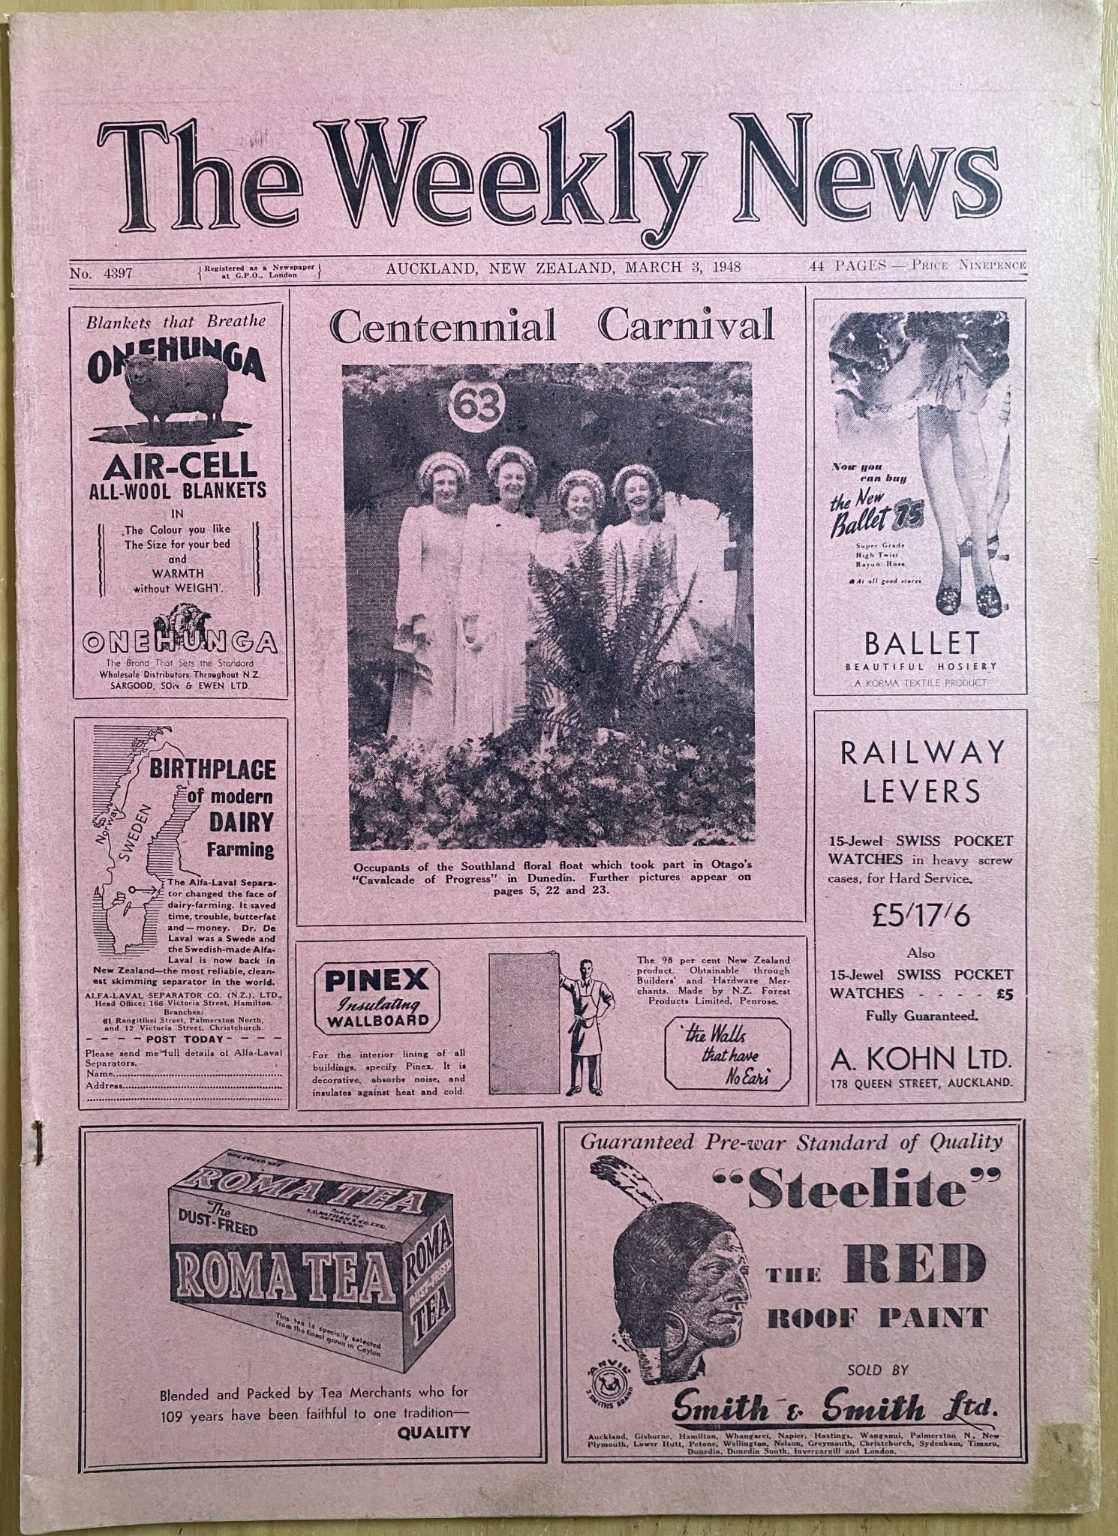 OLD NEWSPAPER: The Weekly News - No. 4397, 3 March 1948